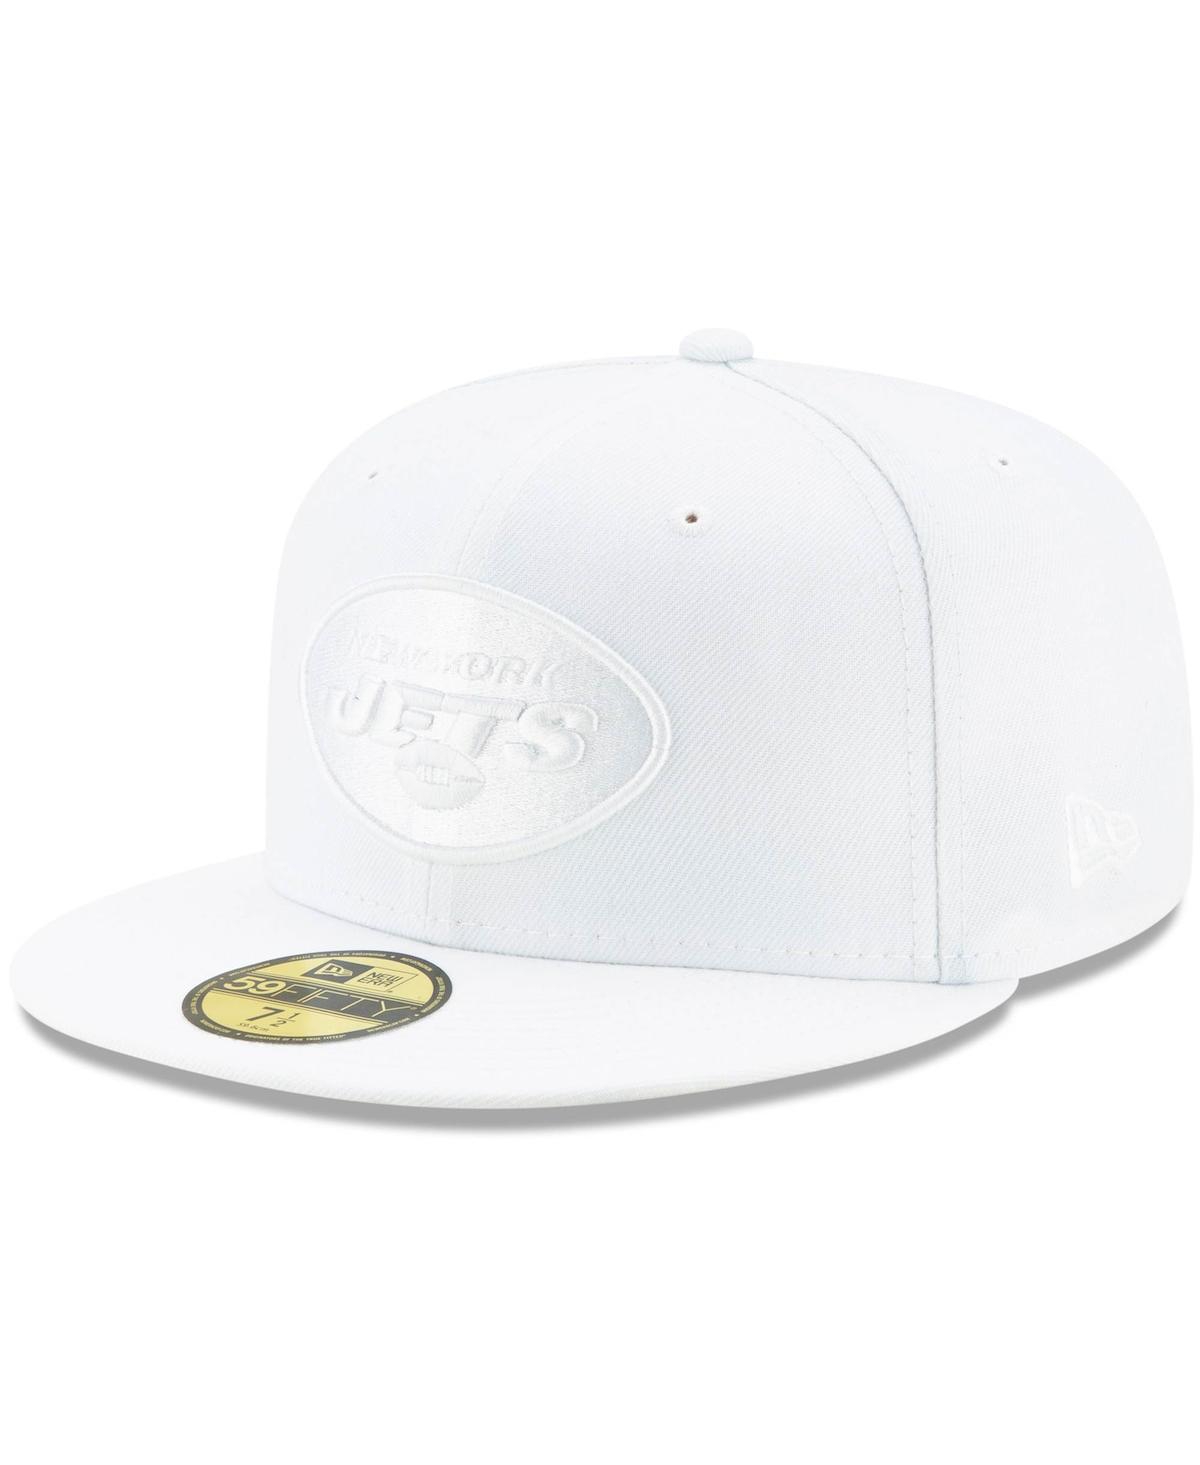 New Era Men's New York Jets White On White 59fifty Fitted Hat